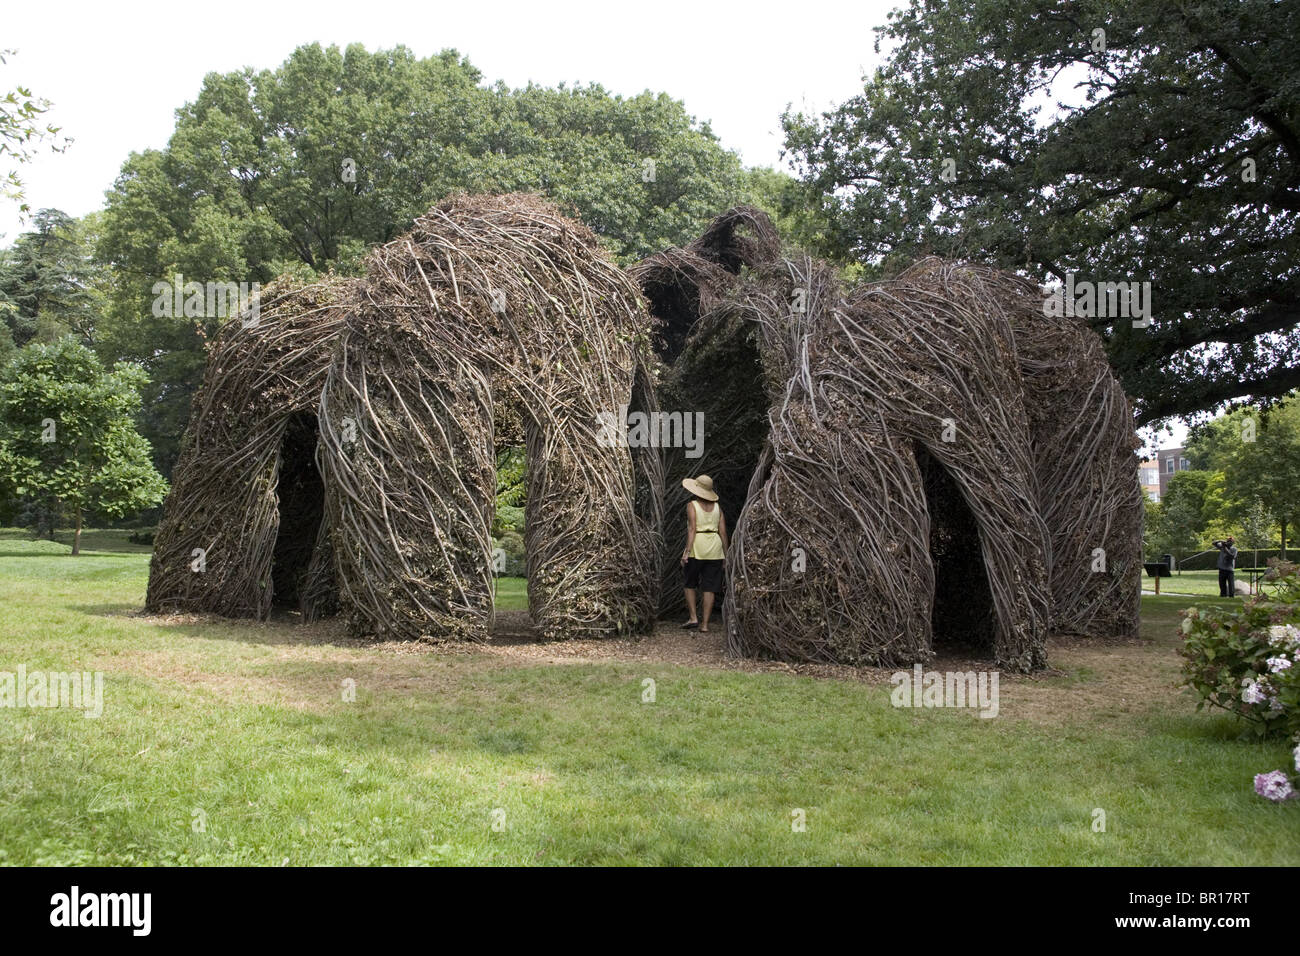 Sculptor Patrick Dougherty  built this monumental sculpture over 3 weeks out of gathered saplings at the Brooklyn Botanic Garden Stock Photo